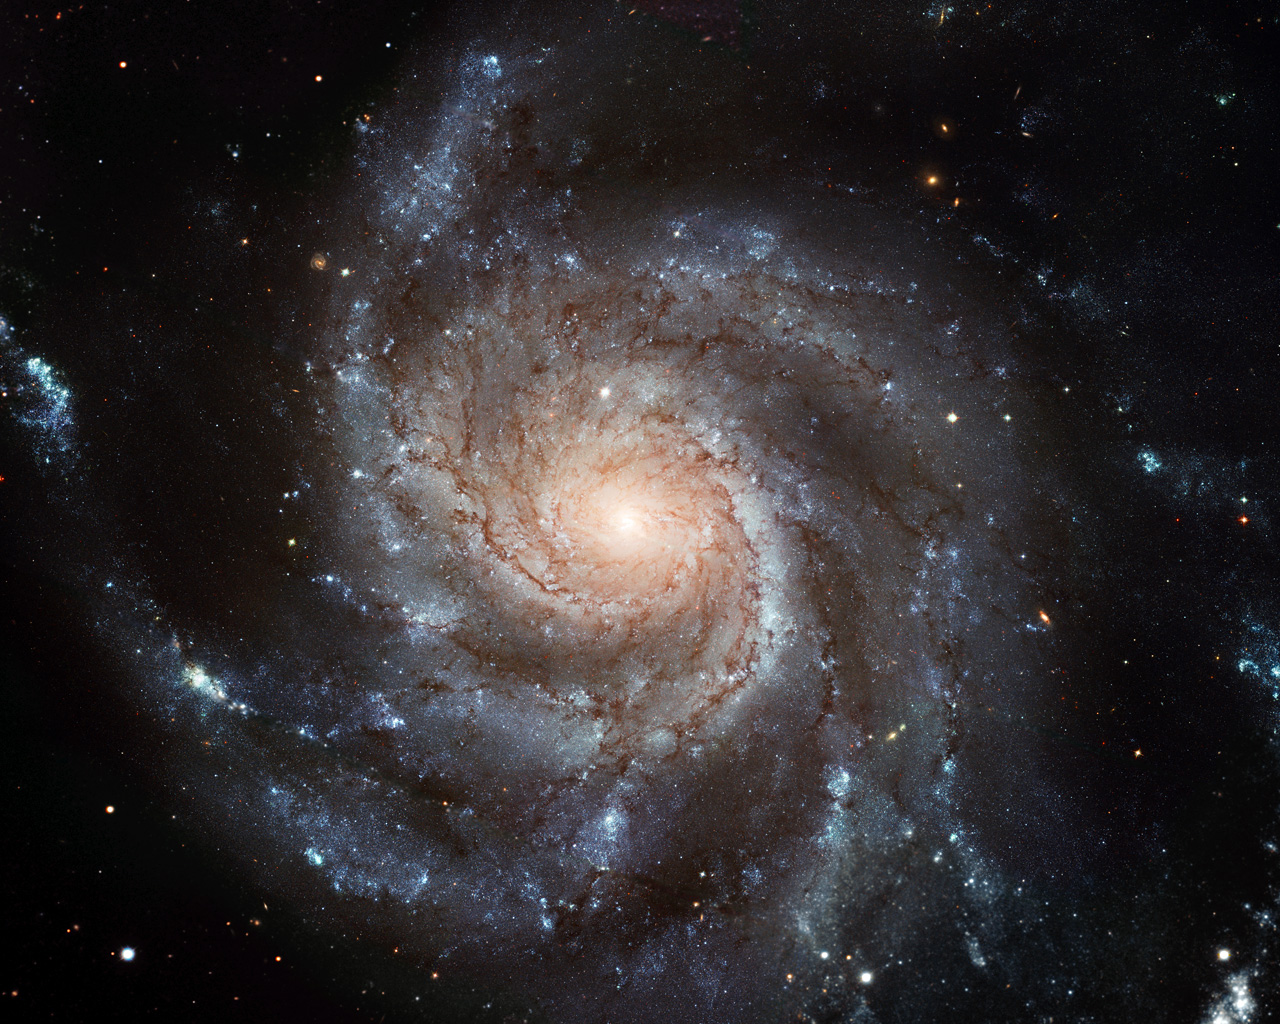 This new Hubble image reveals the gigantic Pinwheel galaxy, one of the best known examples of "grand design spirals", and its supergiant star-forming regions in unprecedented detail. The image is the largest and most detailed photo of a spiral galaxy ever taken with Hubble.